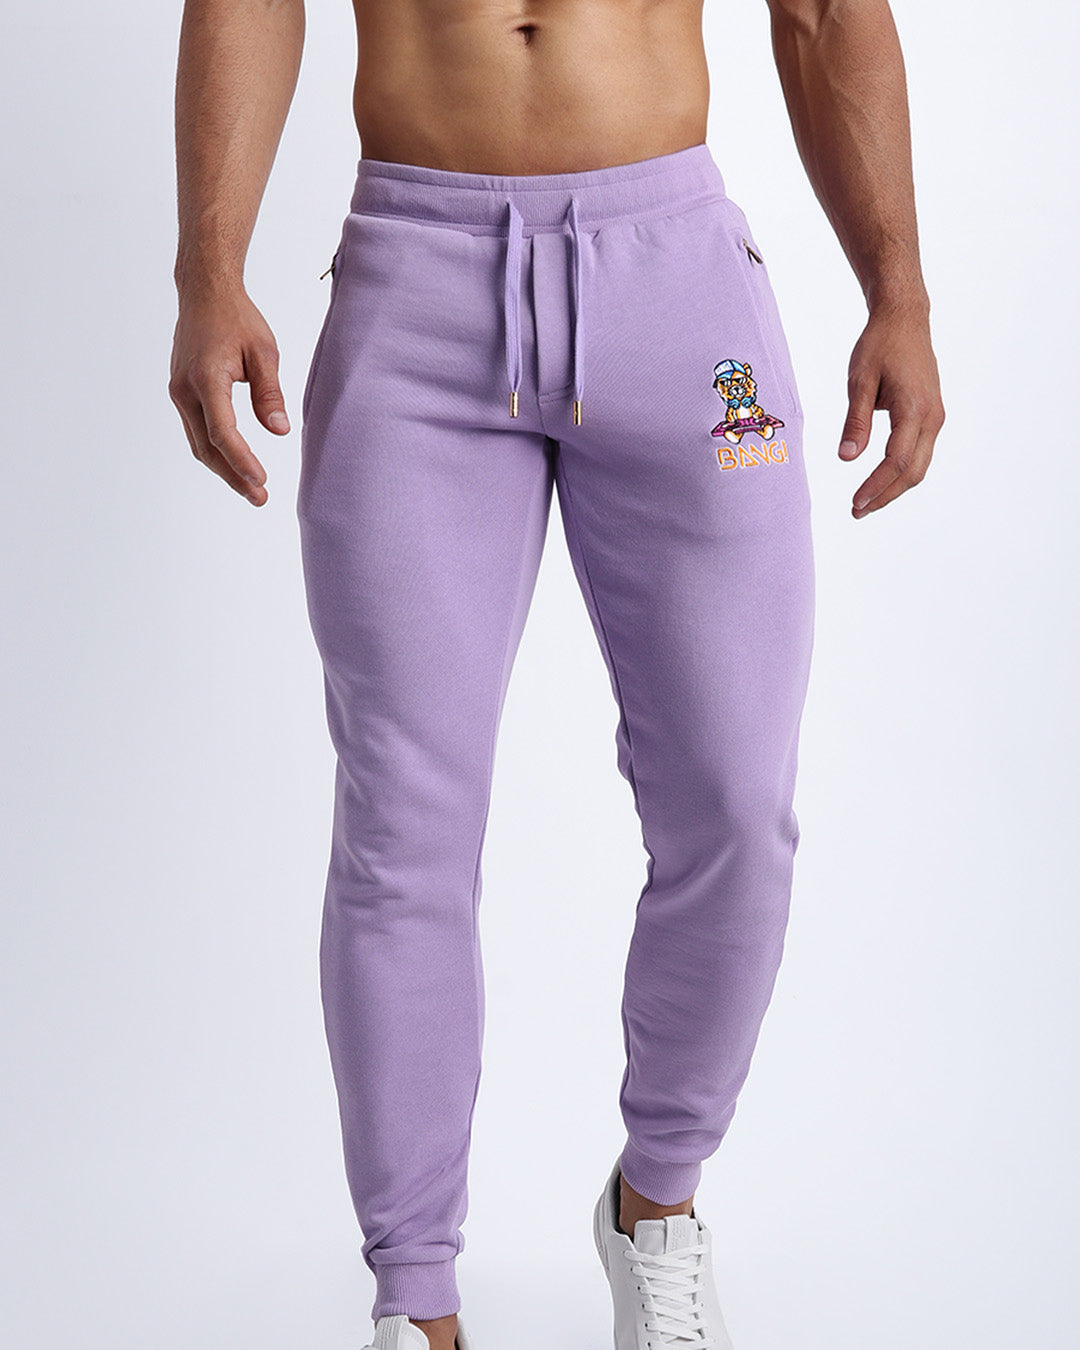 Reduced RQYYD Men's Drawstring Sweatpants Joggers Solid Color Casual Gym  Workout Track Pants Slim Fit Tapered Sweatpants Stretch Athletic Pants( Purple,XXL) - Walmart.com